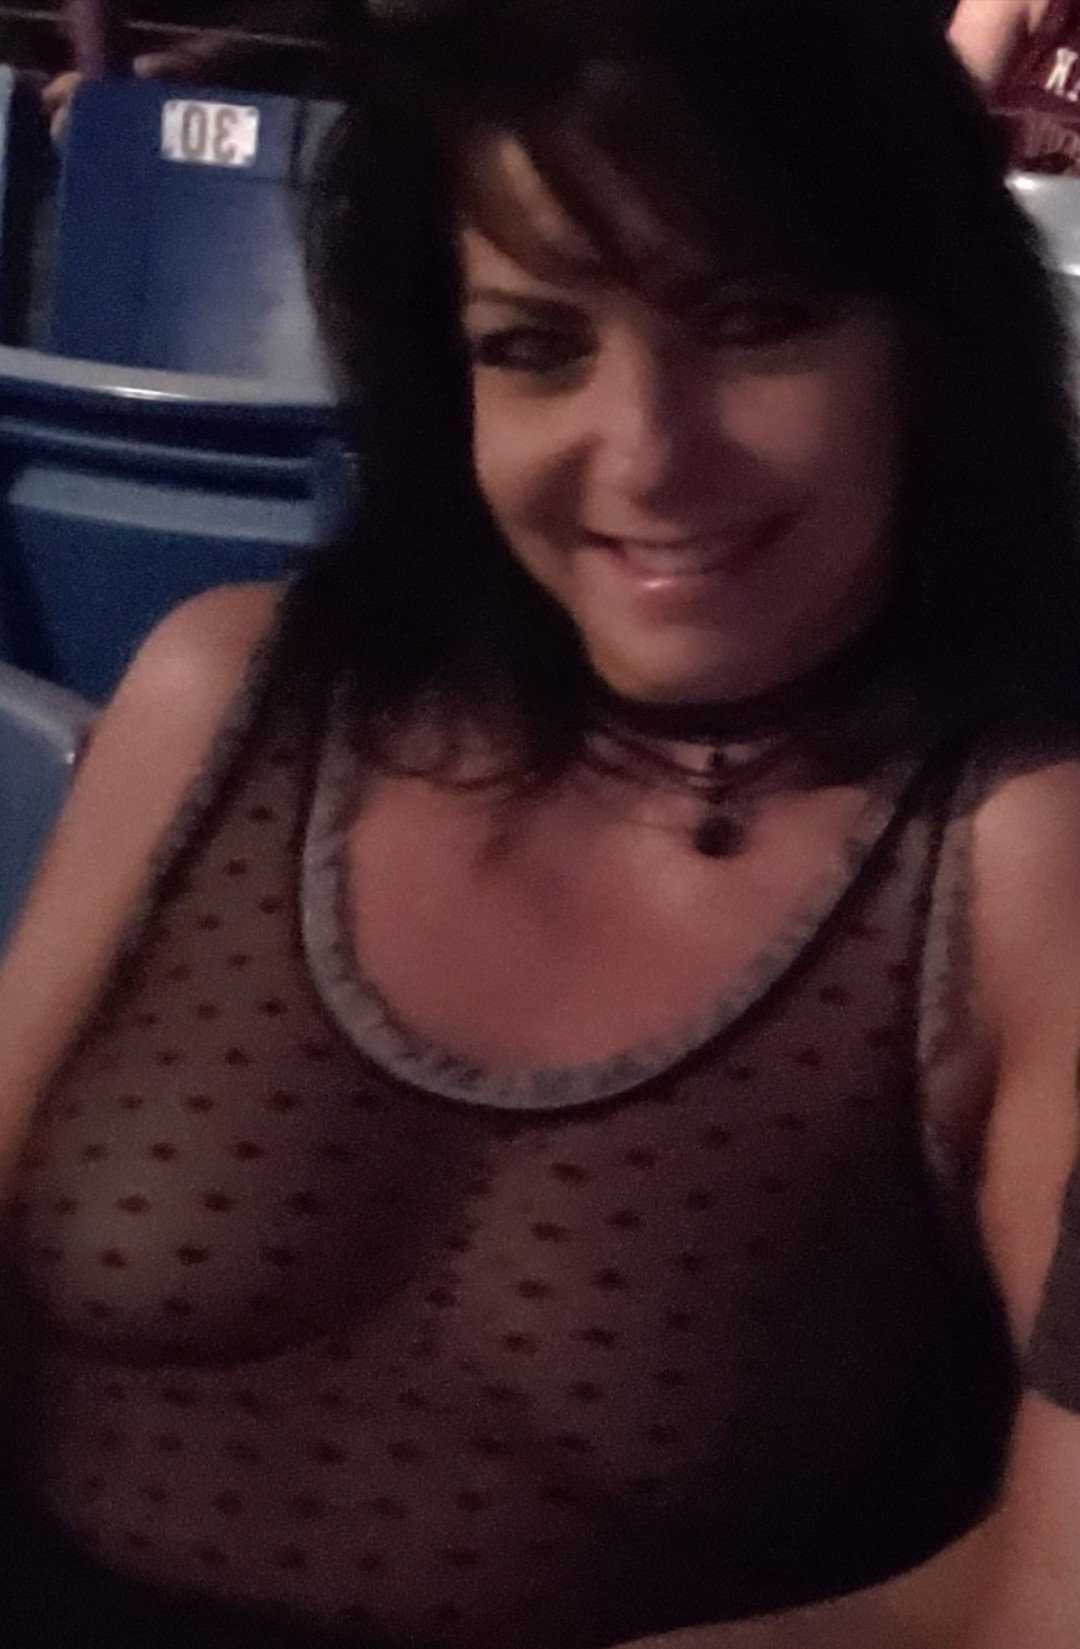 Photo by Sixfive with the username @Sixfive, who is a verified user,  November 11, 2019 at 12:13 AM. The post is about the topic Amateurs and the text says 'My sexy #Hotwife #Vixen with a sheer top and the Alice in chains concert'